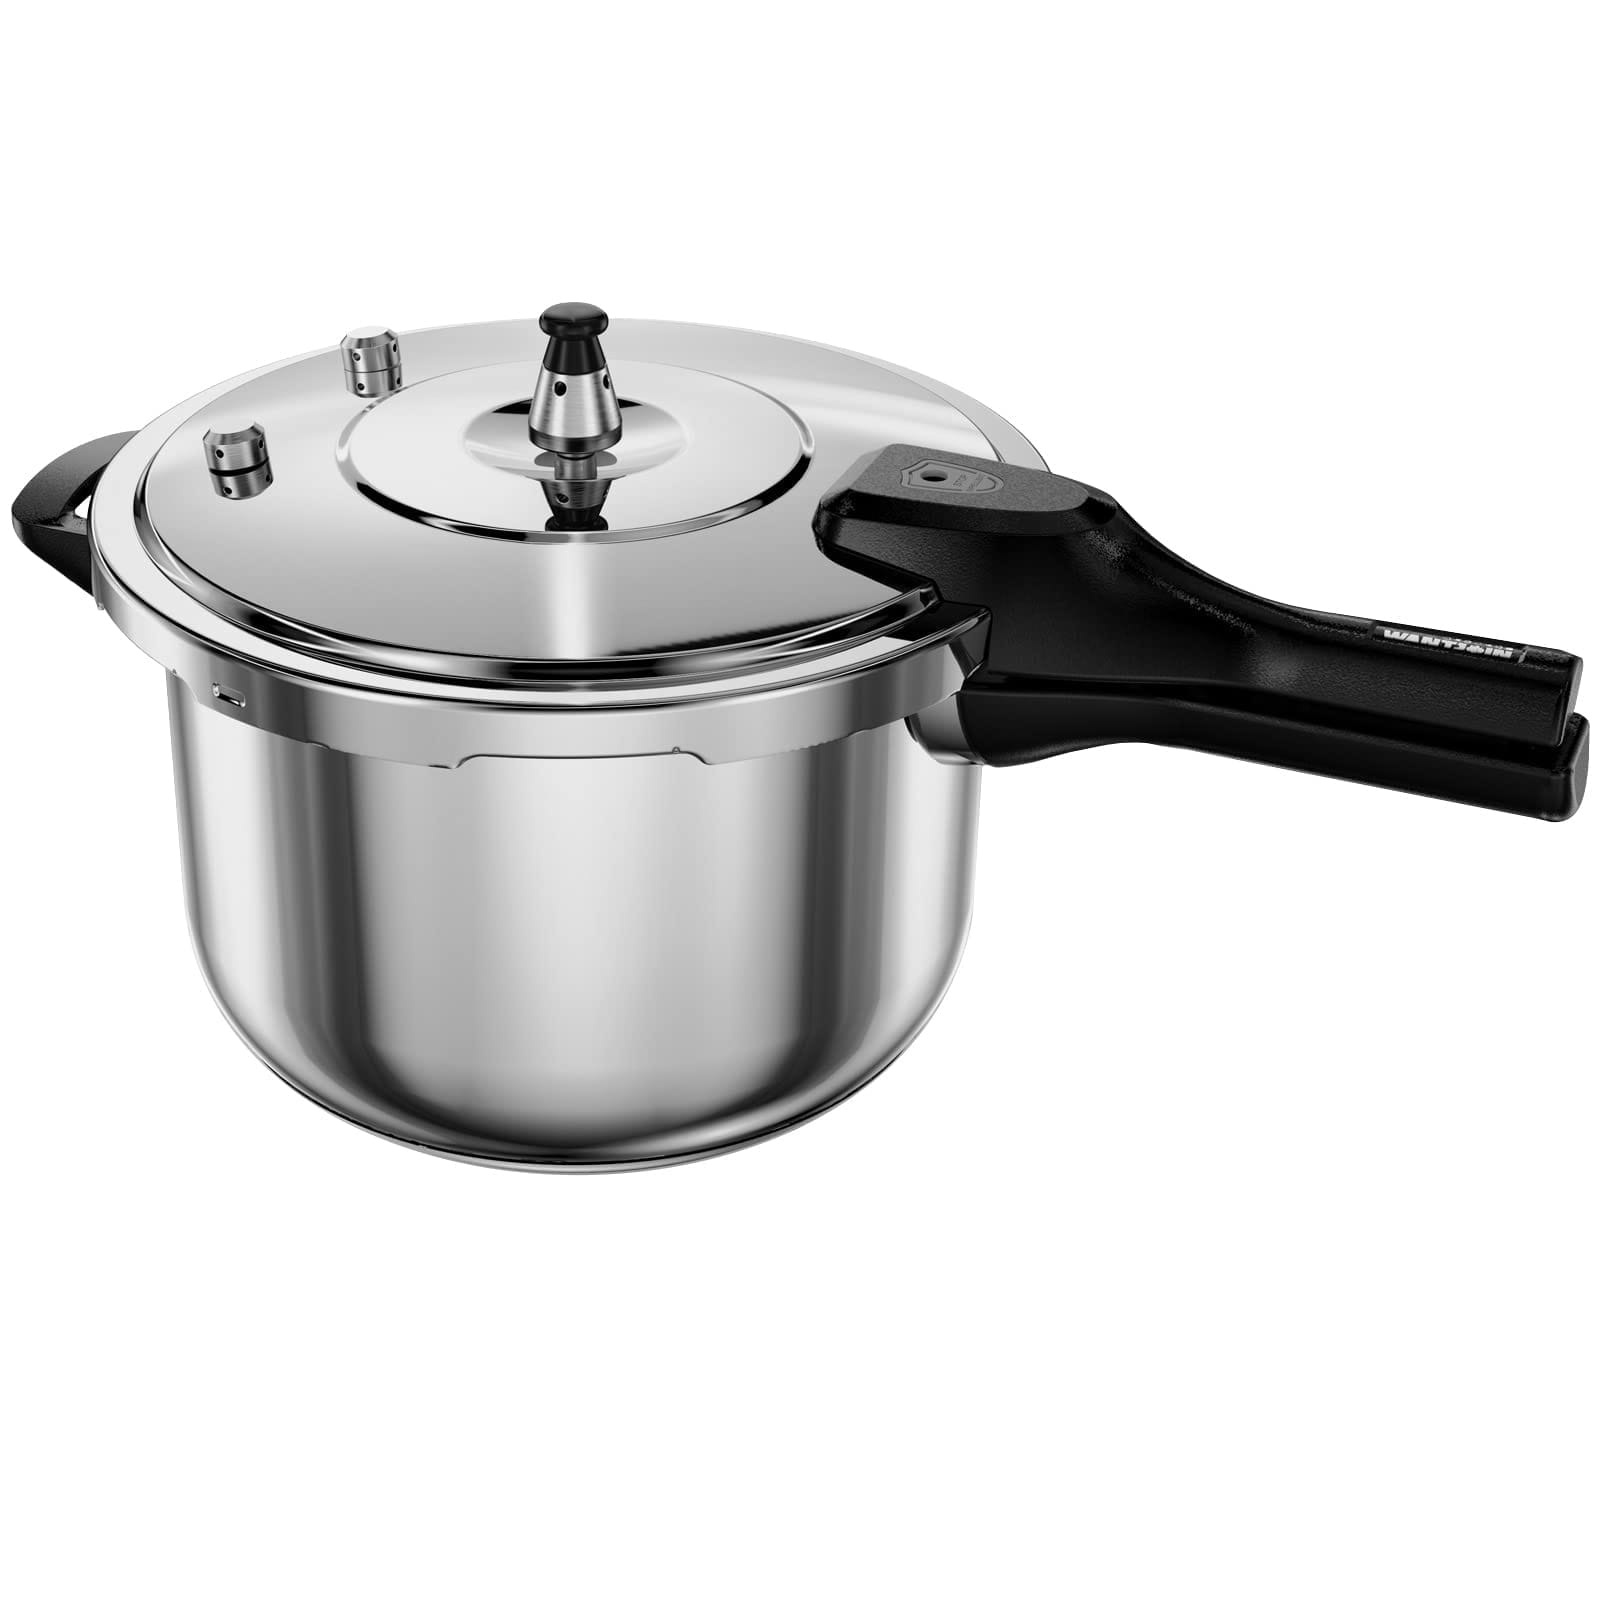 10 best stainless steel pressure cookers tested reviewed 1145 27 8